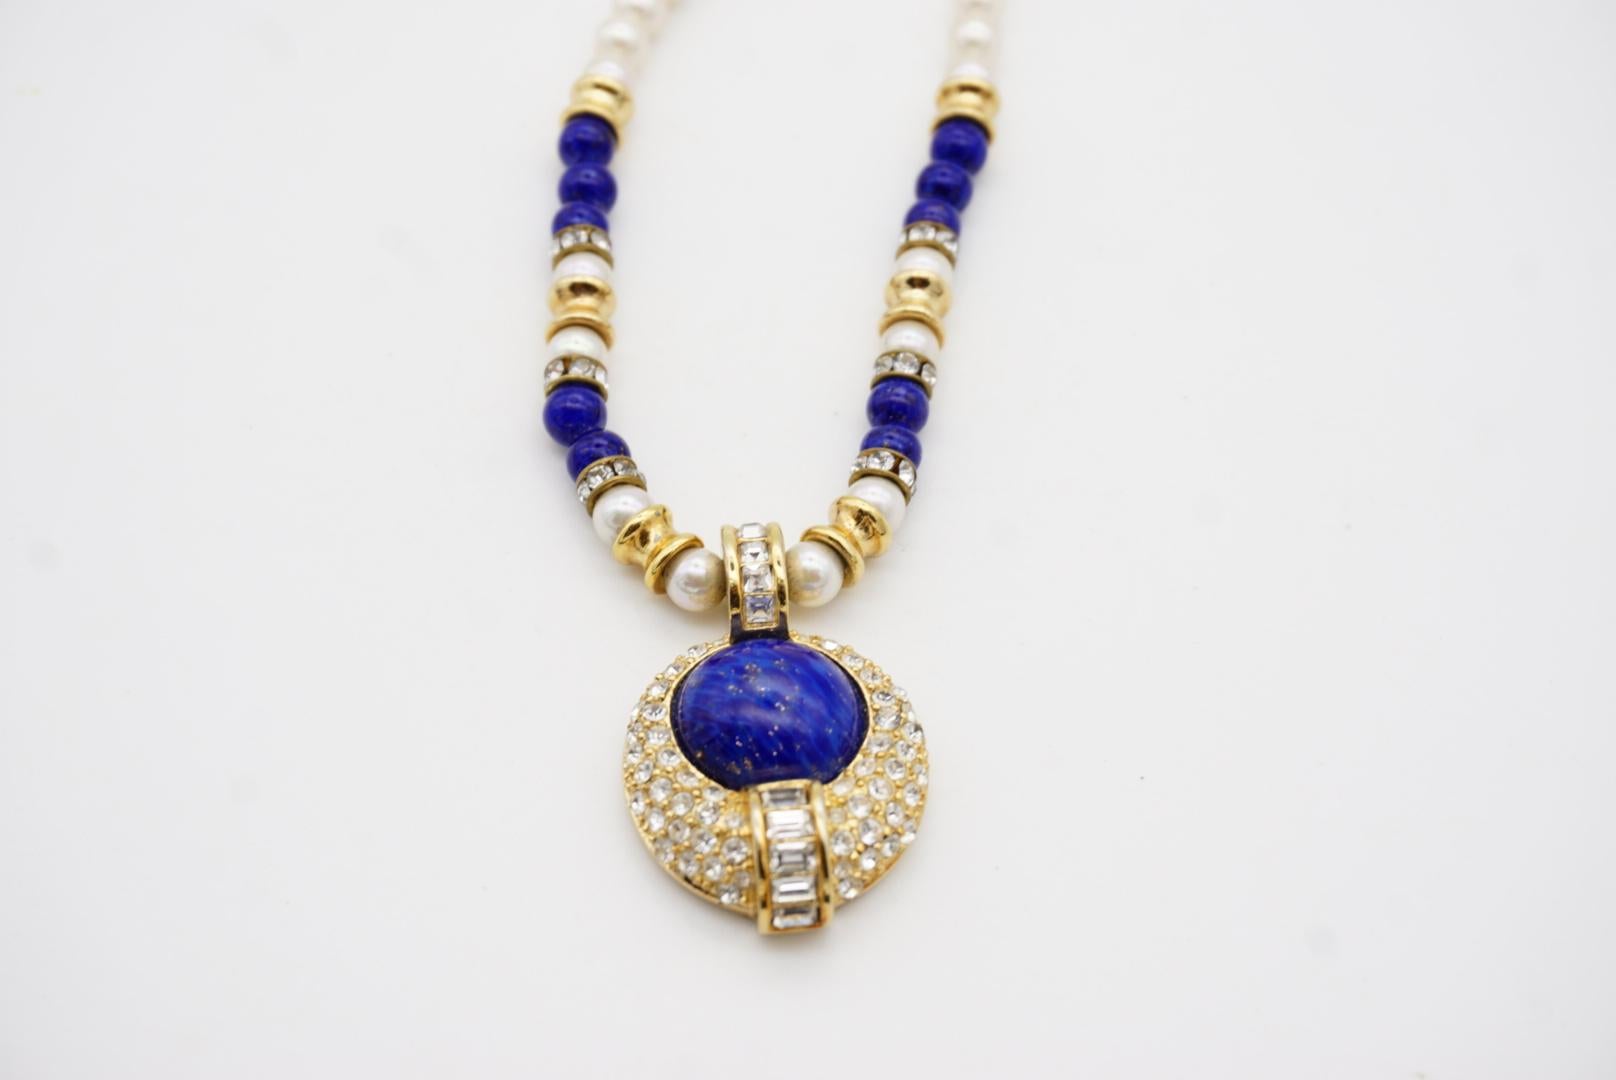 Christian Dior Vintage 1980s White Pearls Lapis Cabochon Crystals Oval Necklace For Sale 6